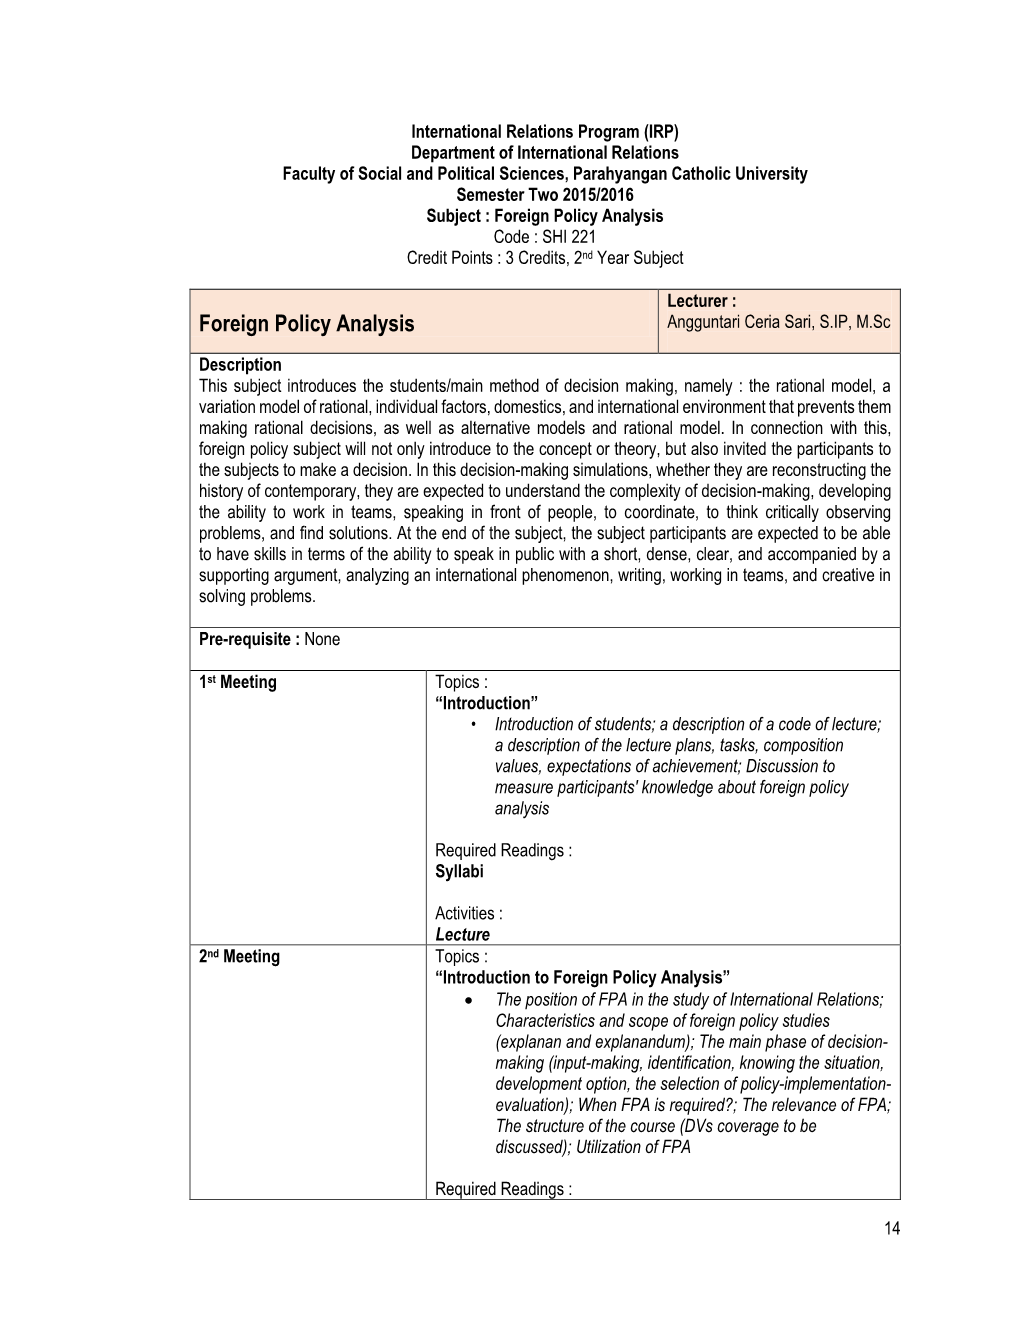 Foreign Policy Analysis Code : SHI 221 Credit Points : 3 Credits, 2Nd Year Subject